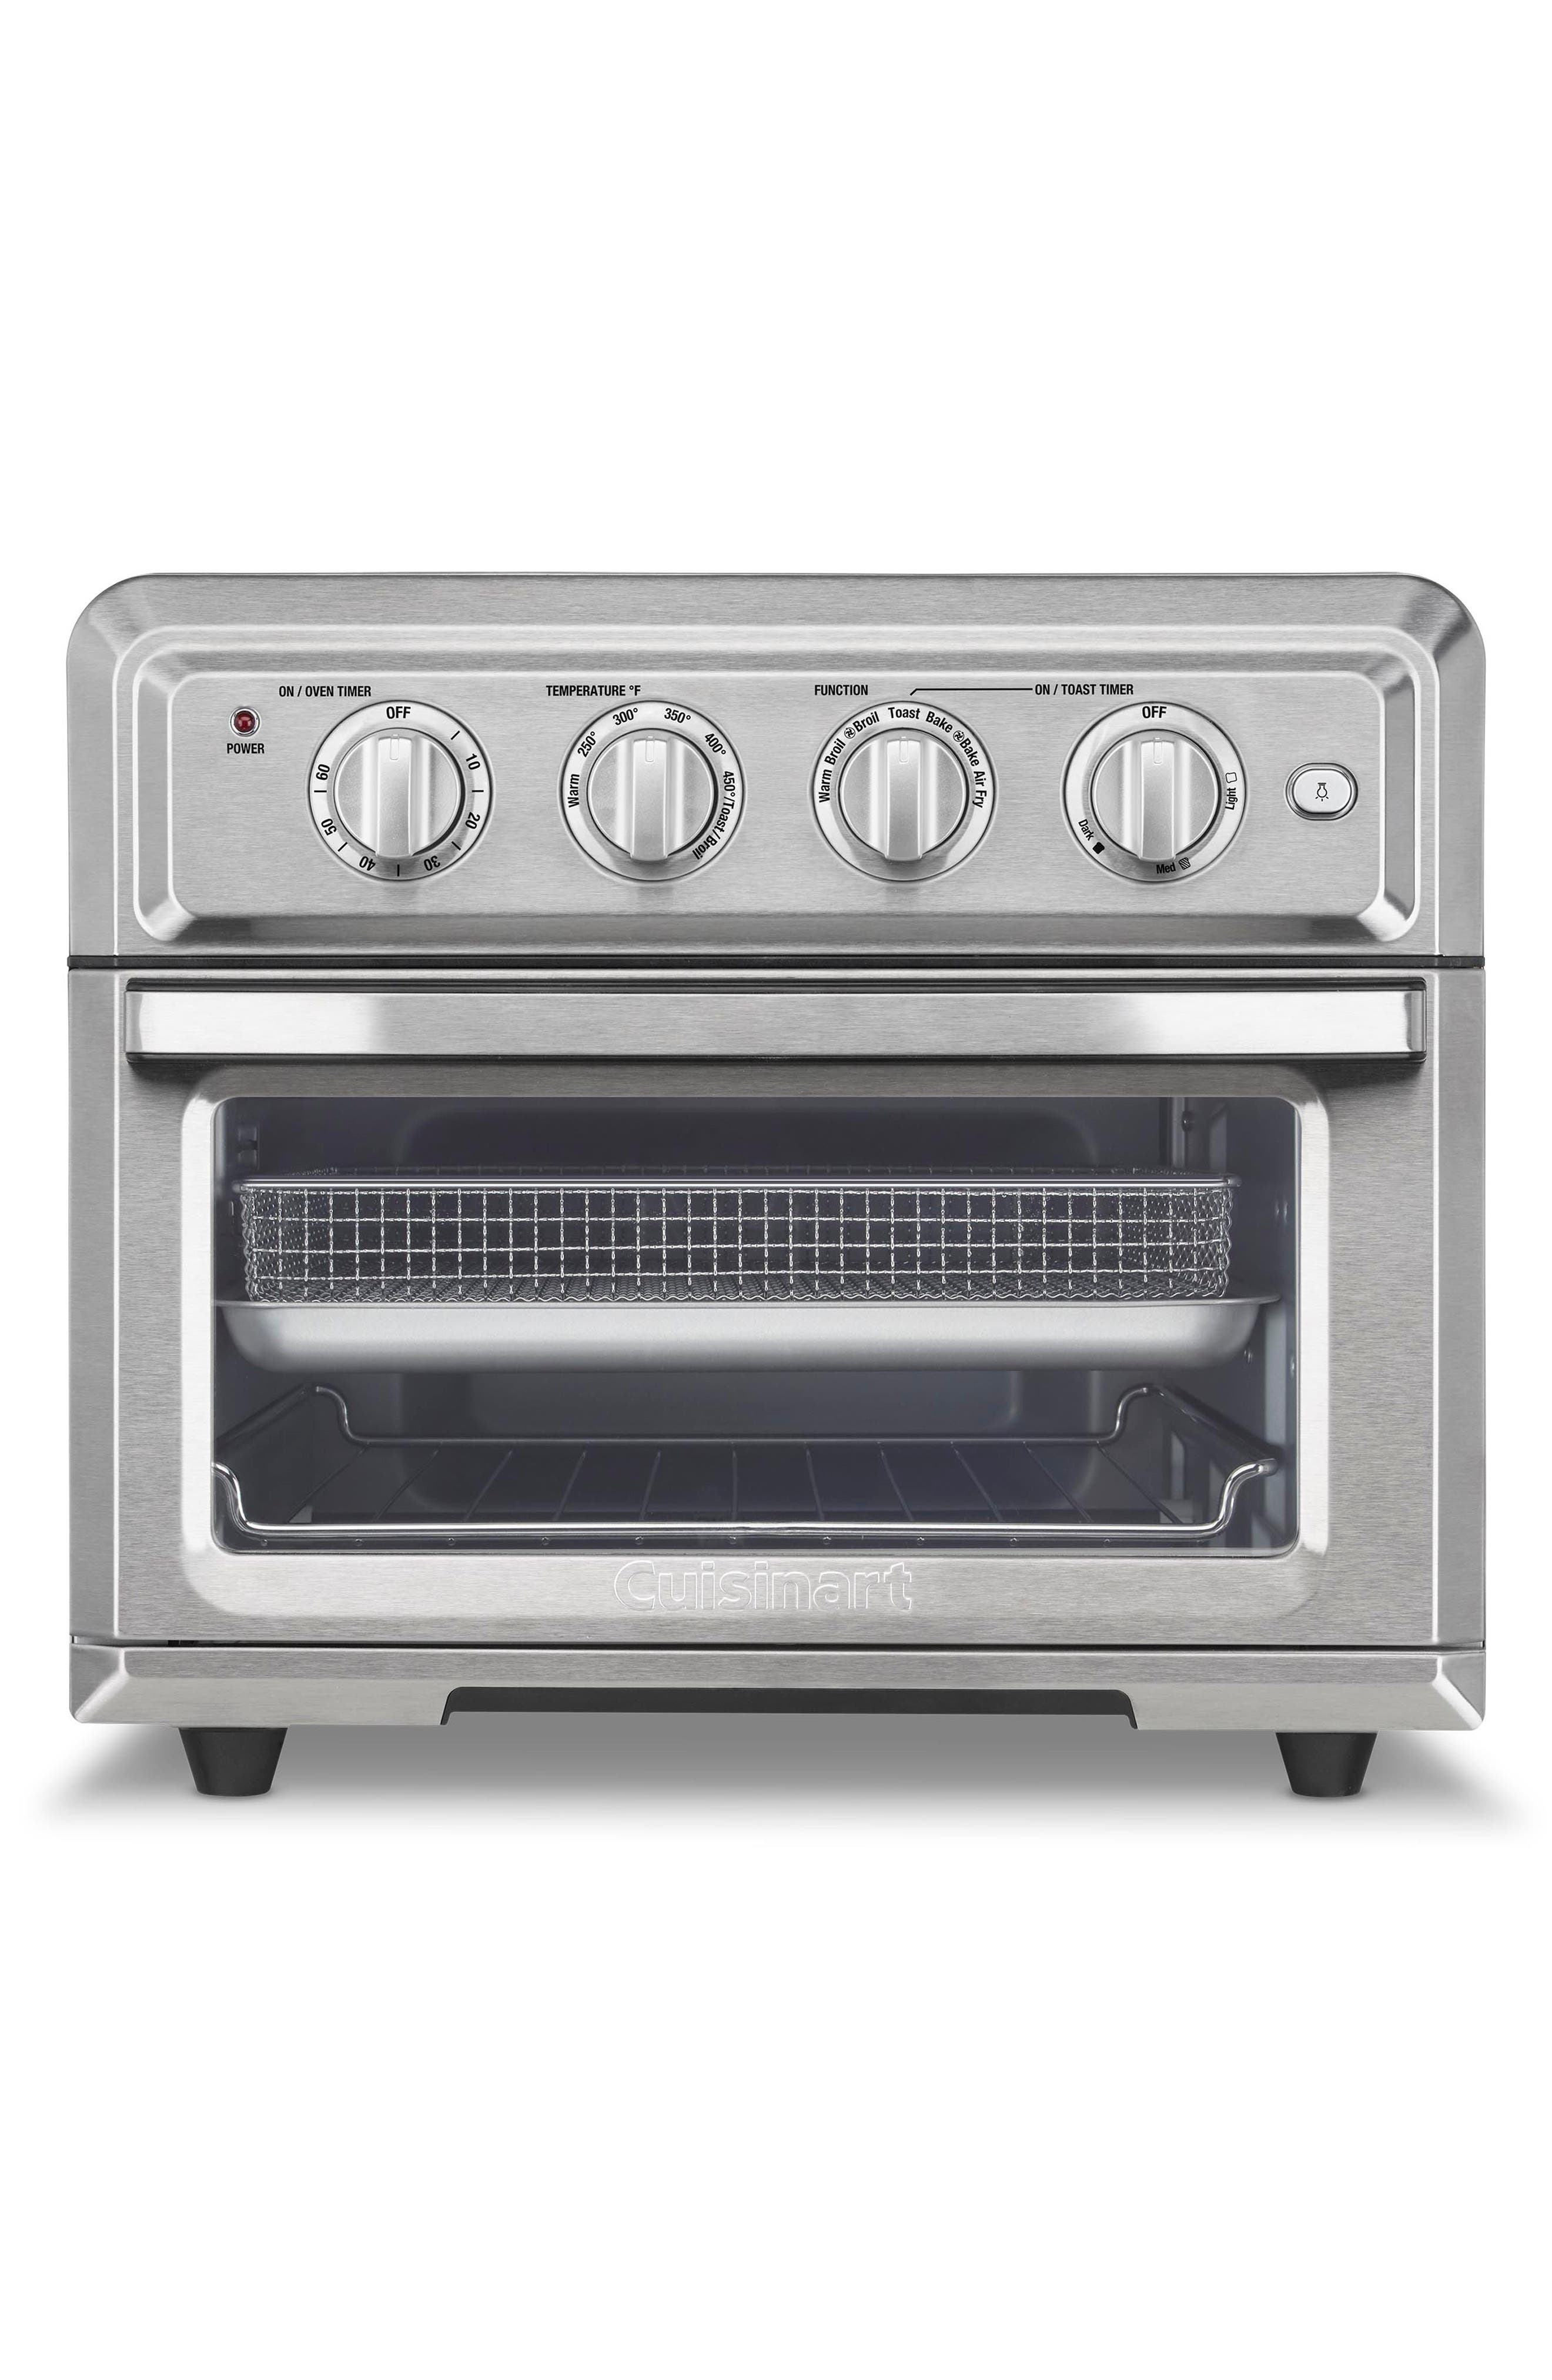 UPC 086279116710 product image for Cuisinart Airfryer Toaster Oven, Size One Size - Metallic | upcitemdb.com